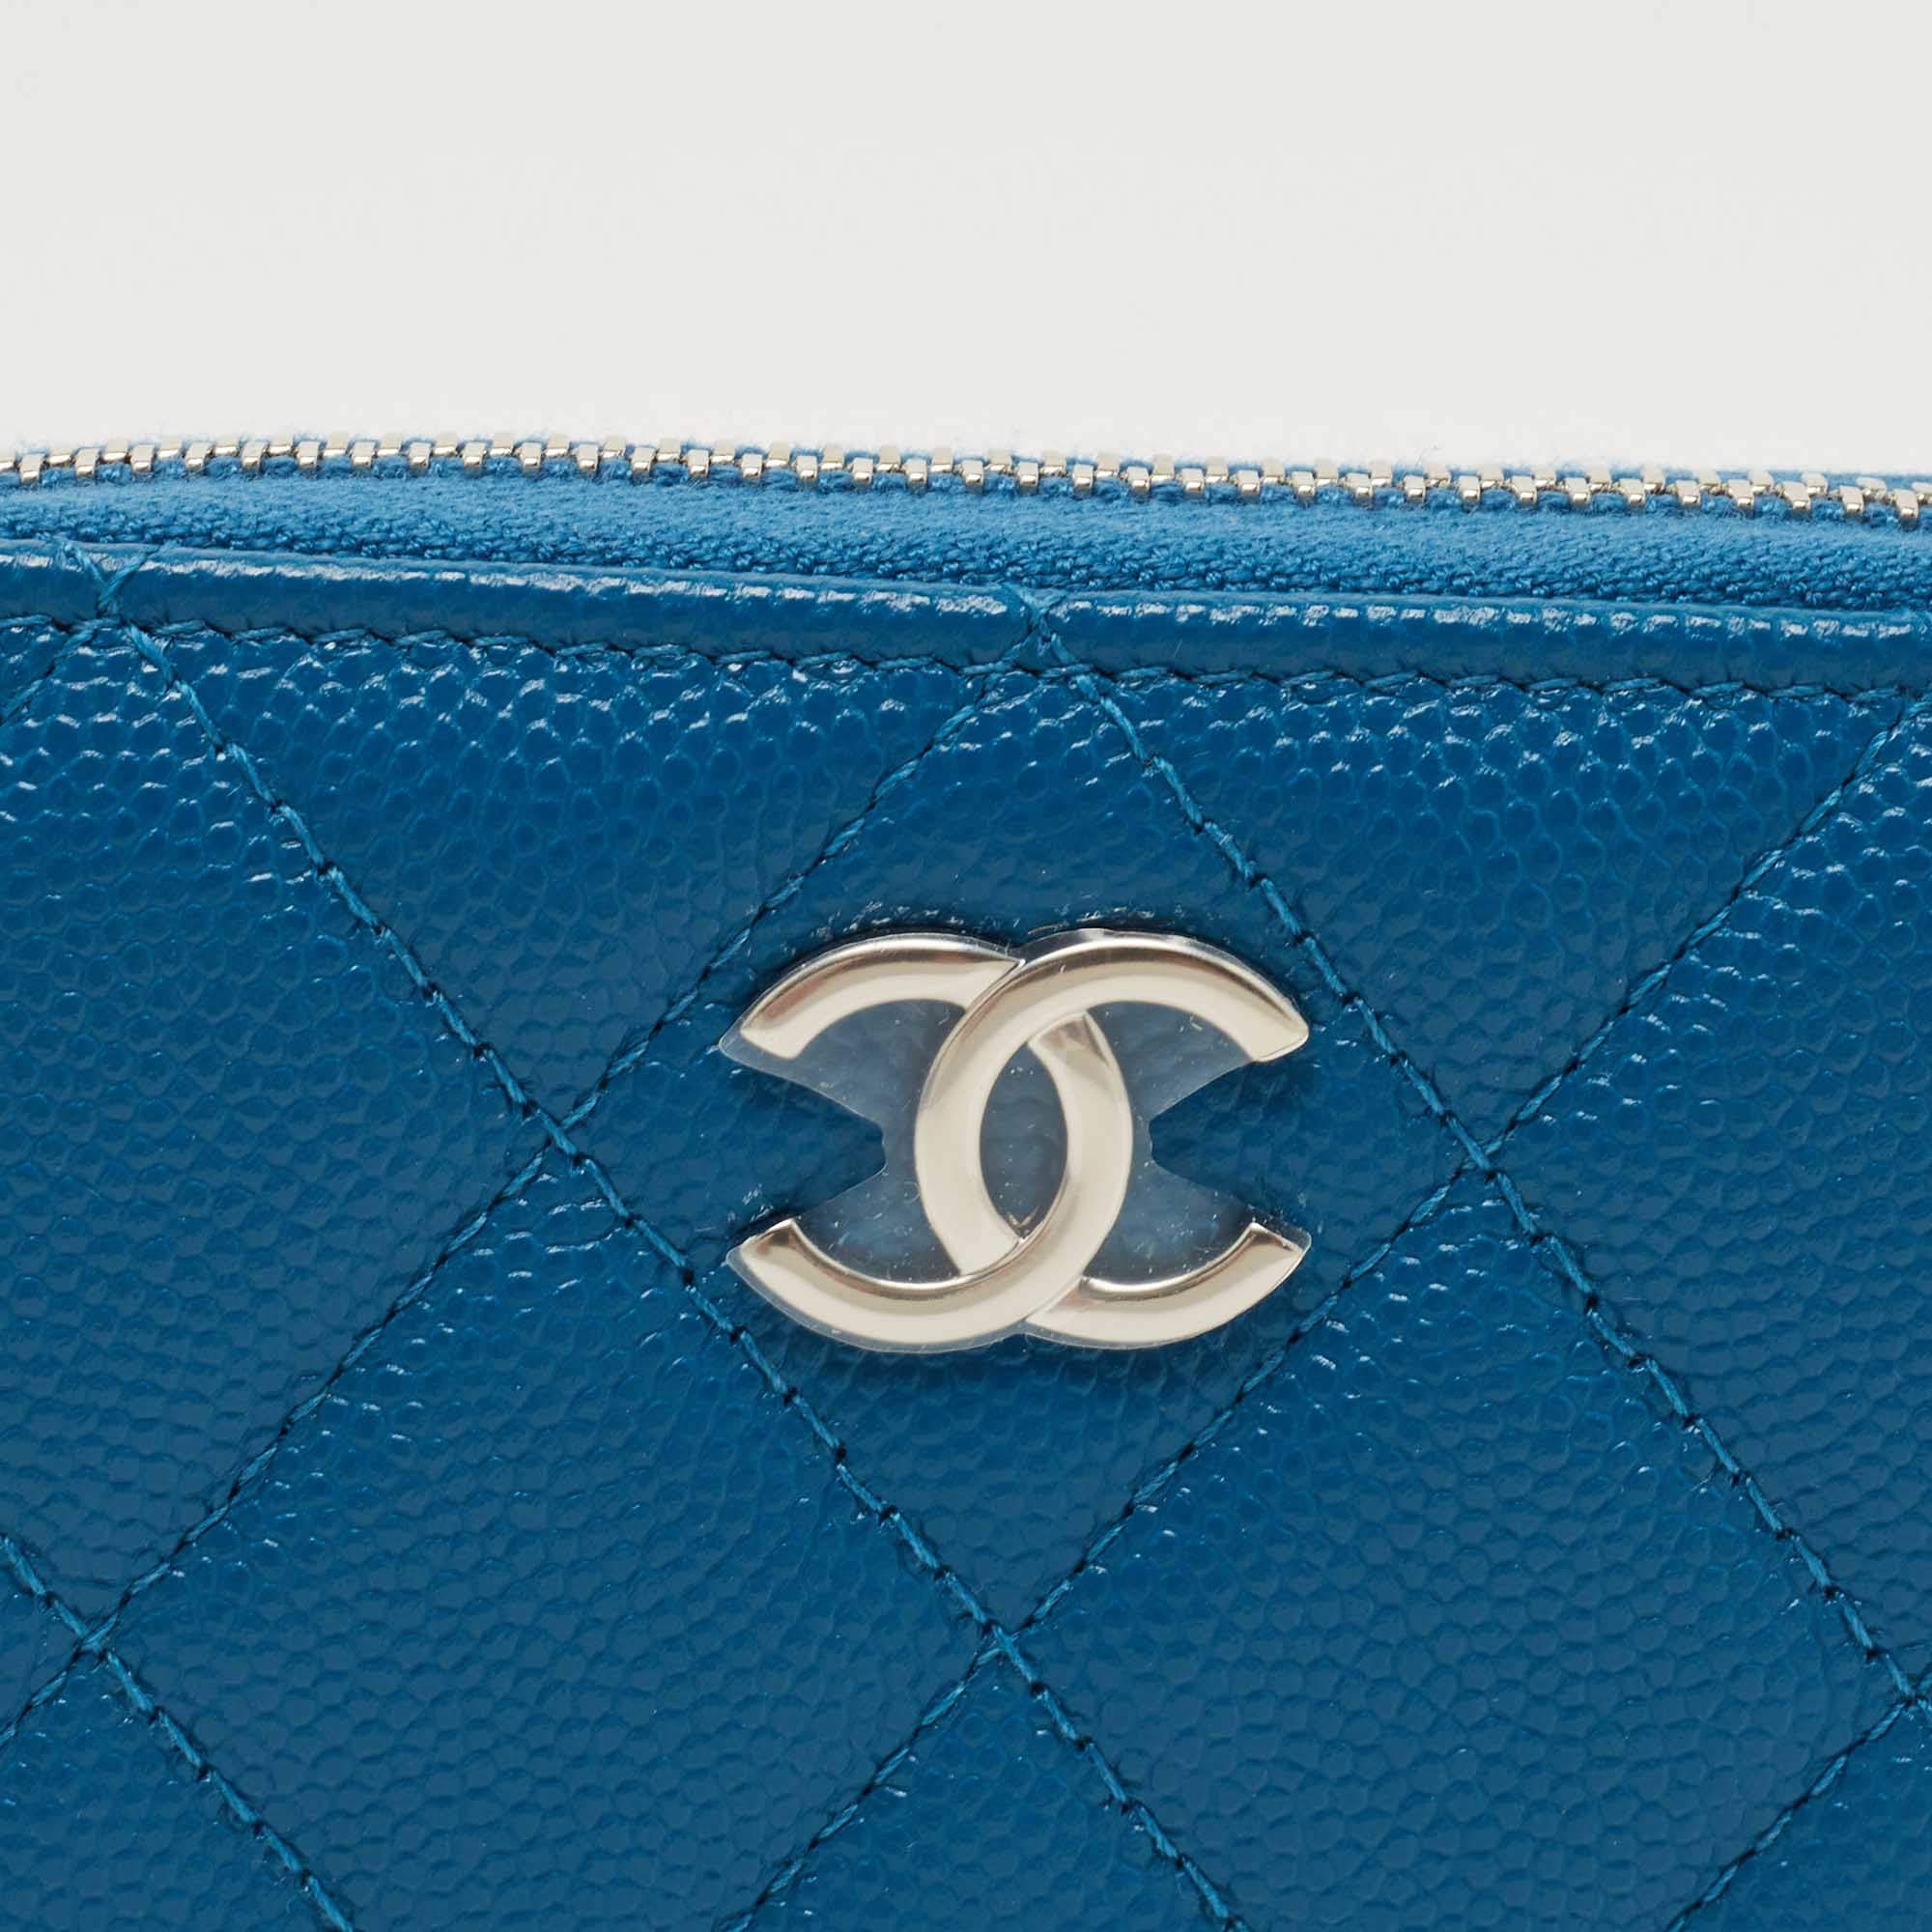 Chanel Blue Quilted Caviar Leather Classic Zipped Coin Purse